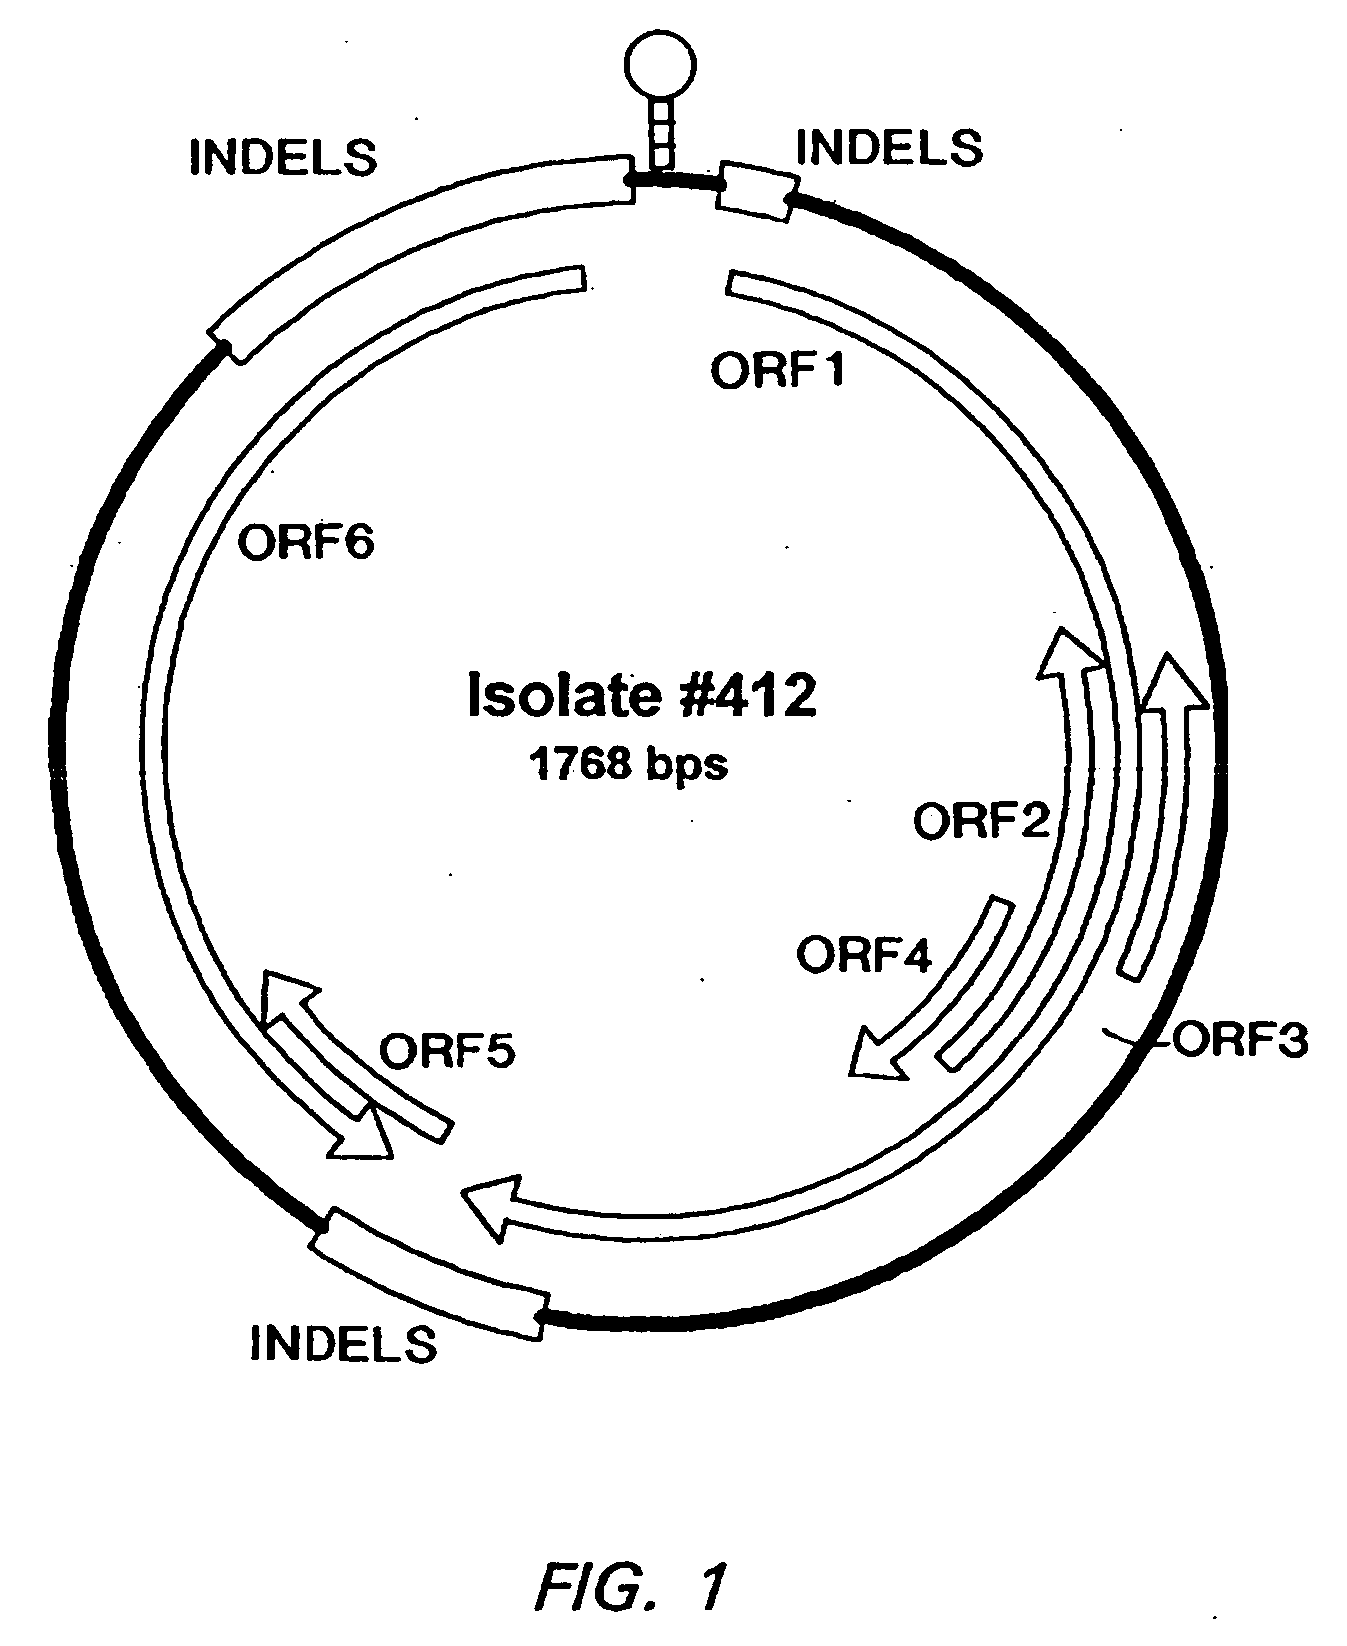 Porcine circovirus and Helicobacter combination vaccines and methods of use